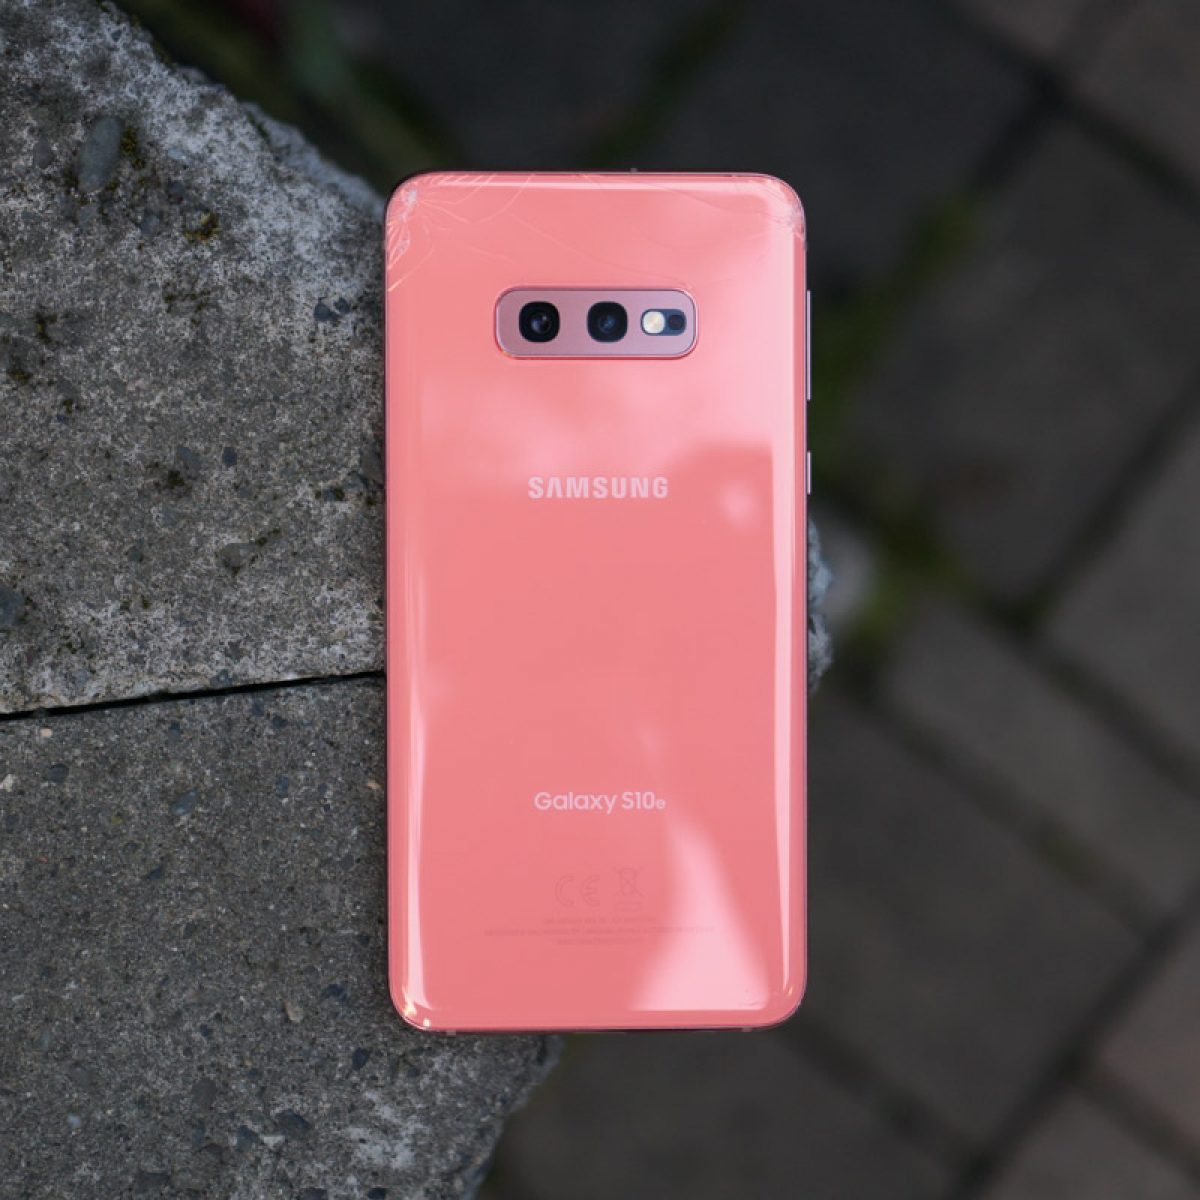 Samsung Galaxy S10e Review: Yo! This is the Phone.